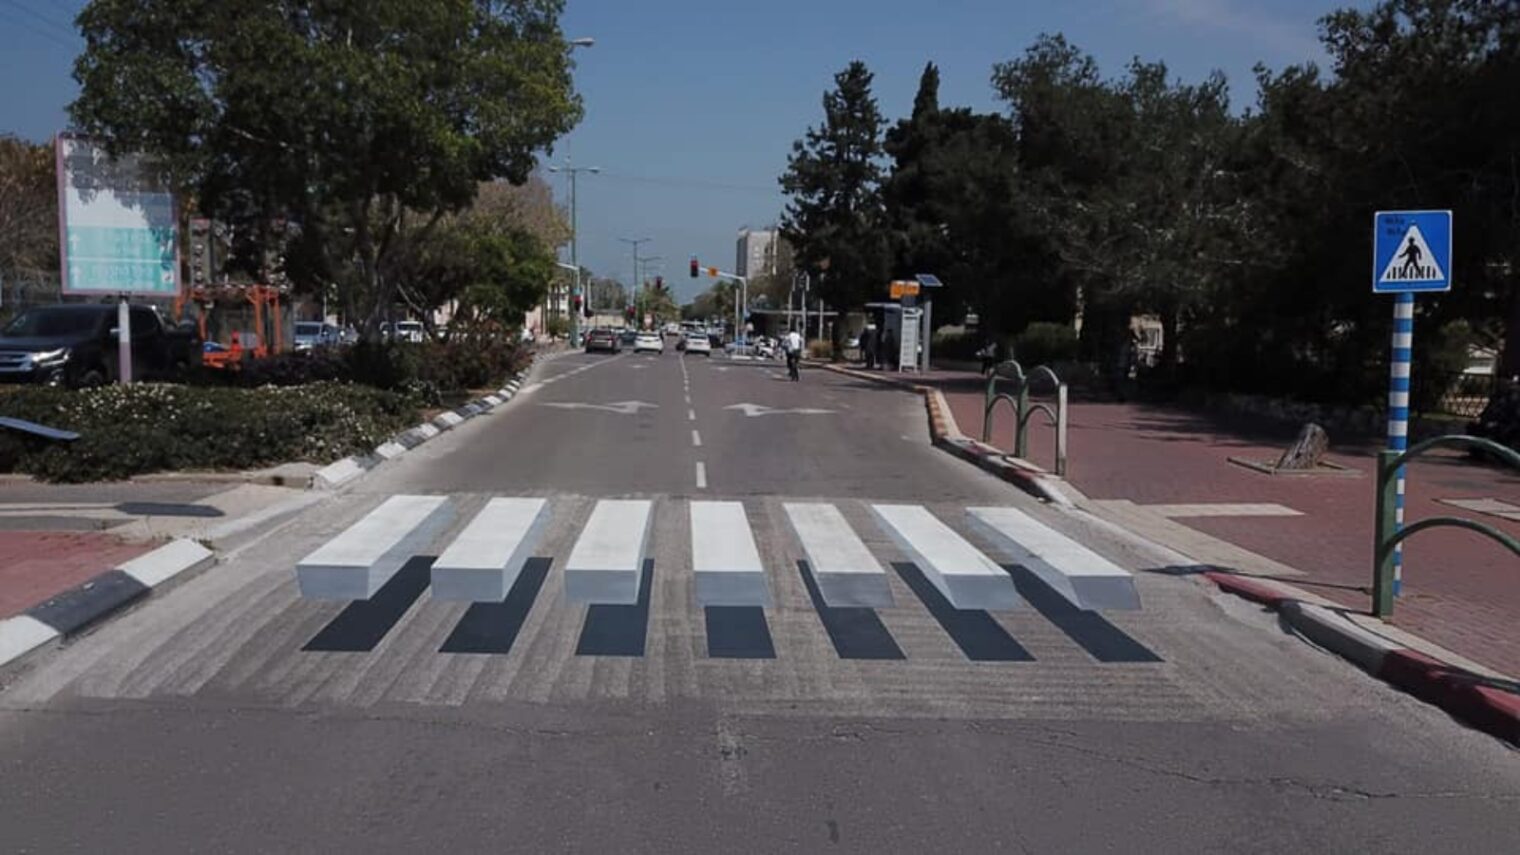 Ashkelon's new 3D crossing is intended to alert drivers and keep pedestrians safer. Photo by Eldad Ovadia